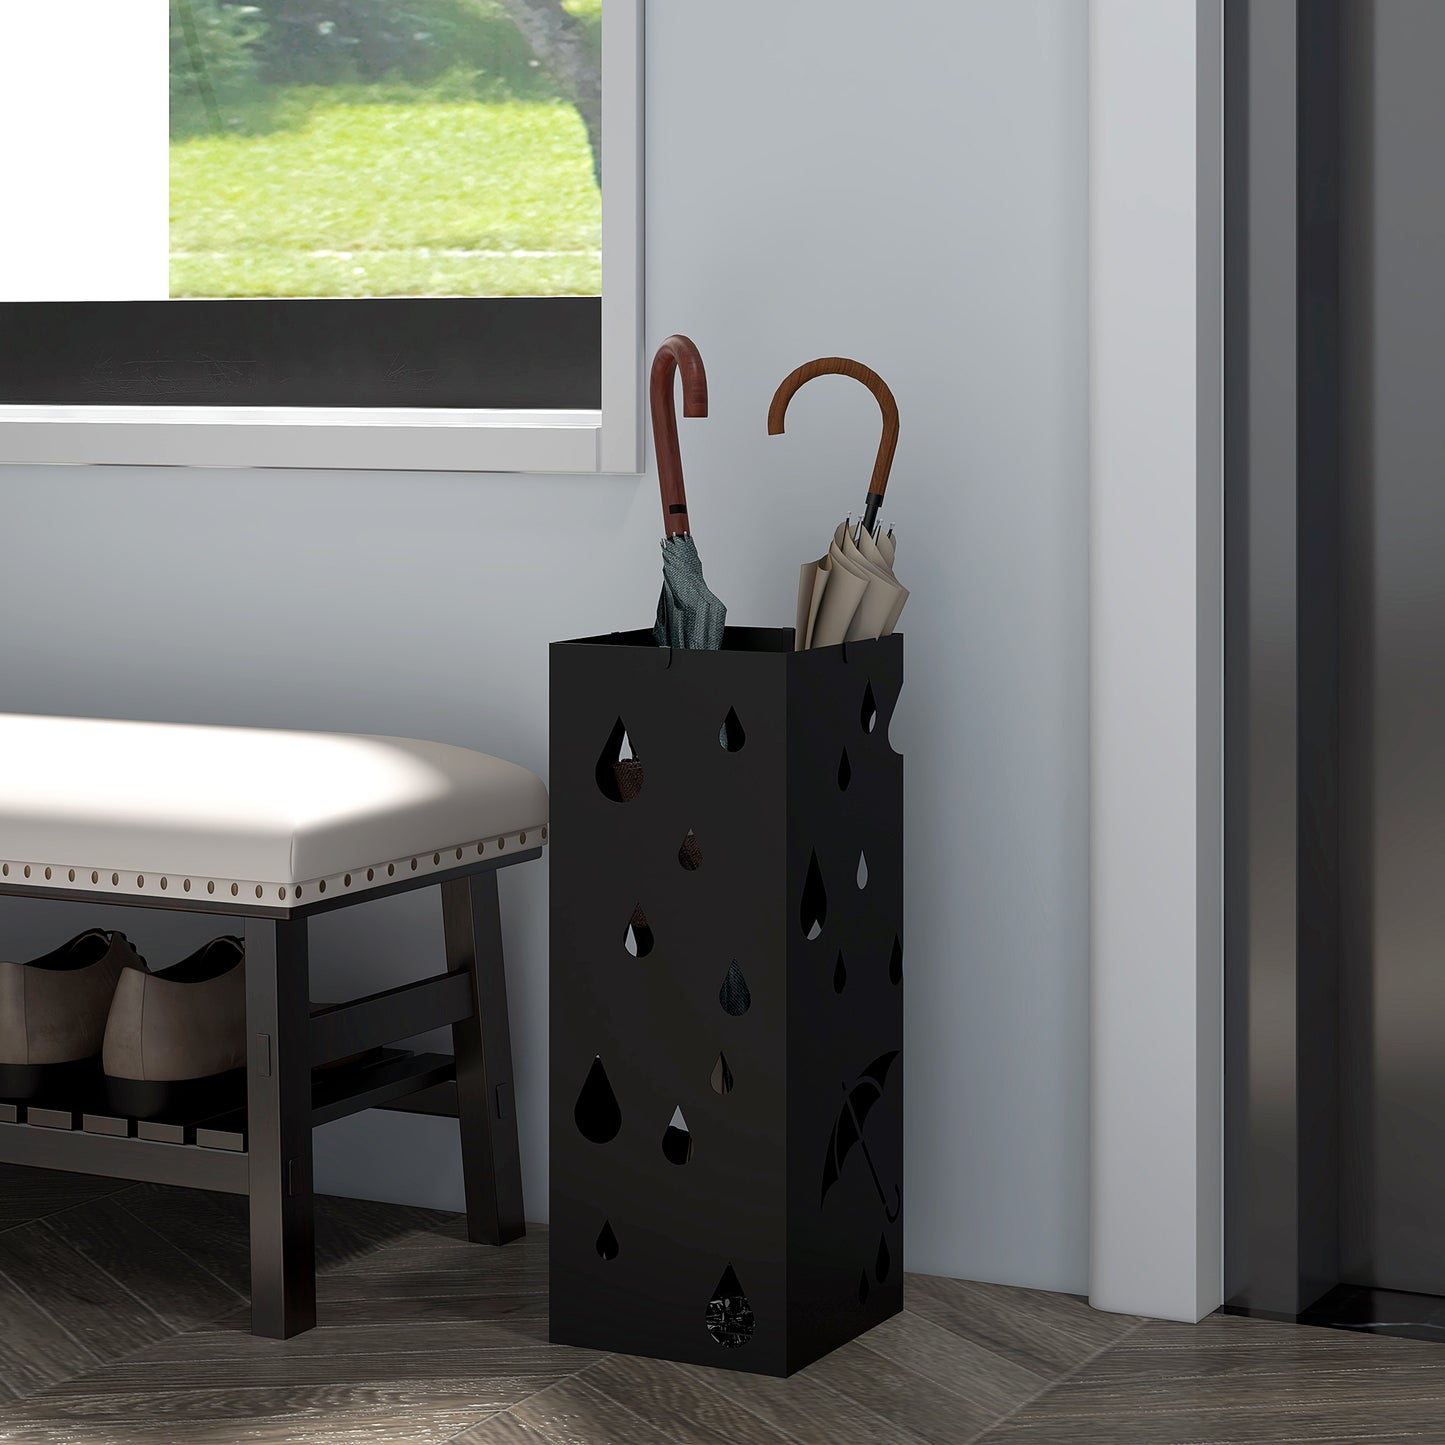 HOMCOM Freestanding Umbrella Stand for Hallway Square Umbrella Basket with 4 Hooks and Drip Tray for Entryway Dark Grey